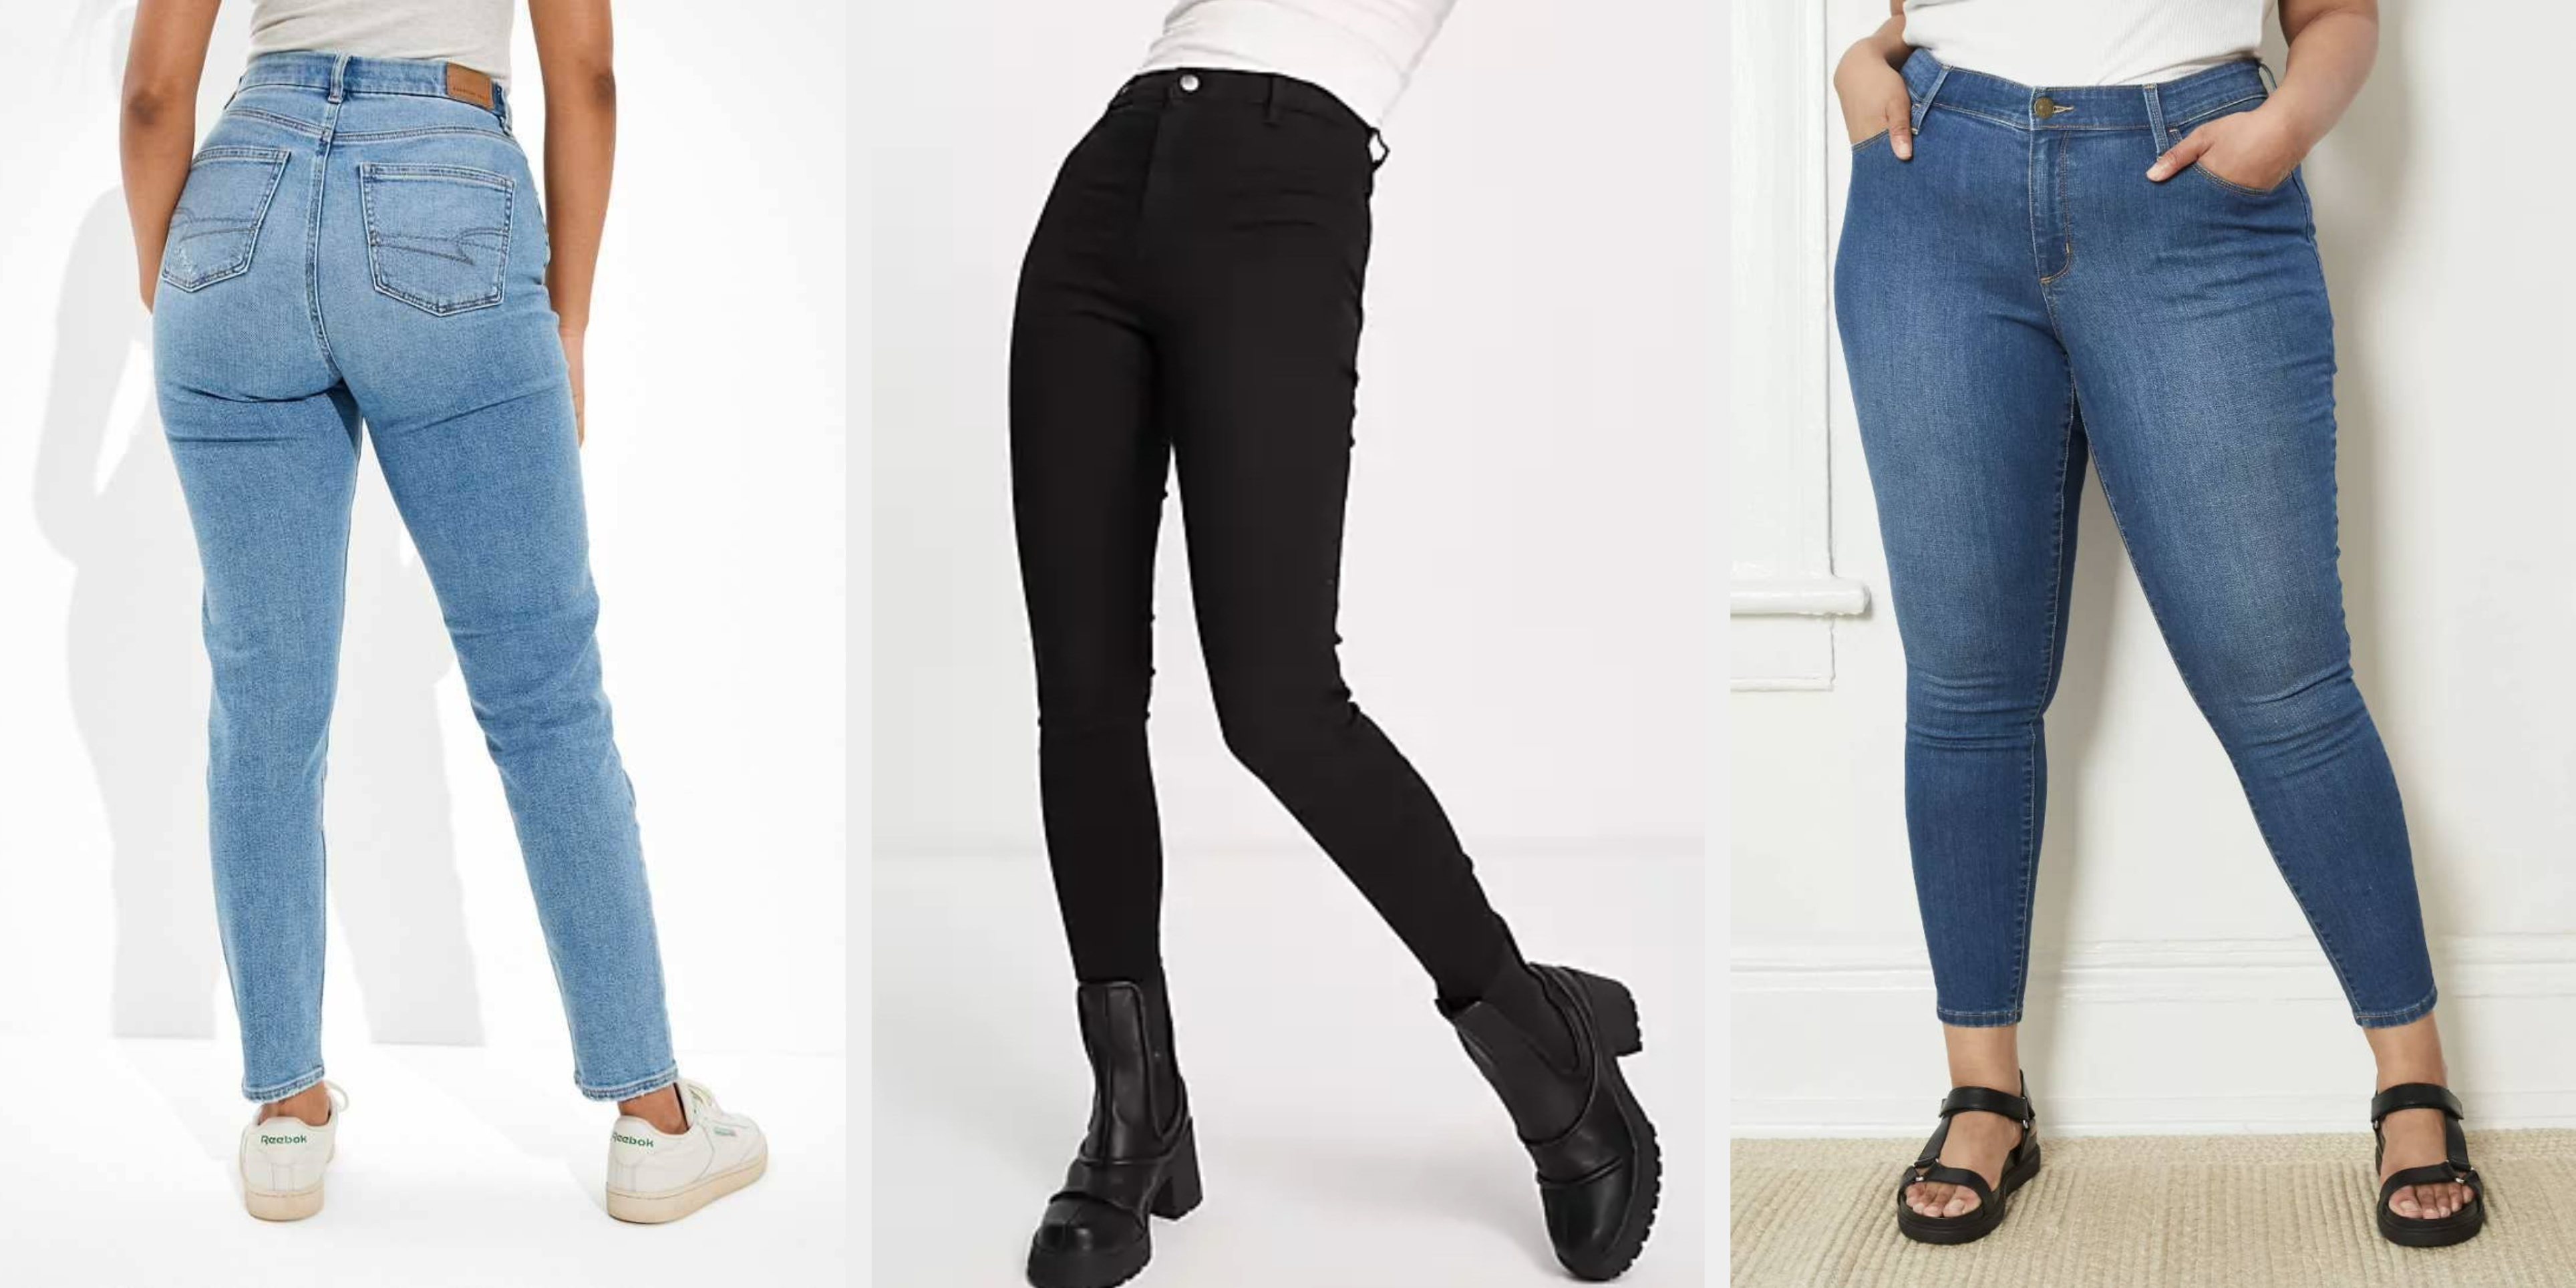 19 Most Comfortable Jeans Brands That People Swear By